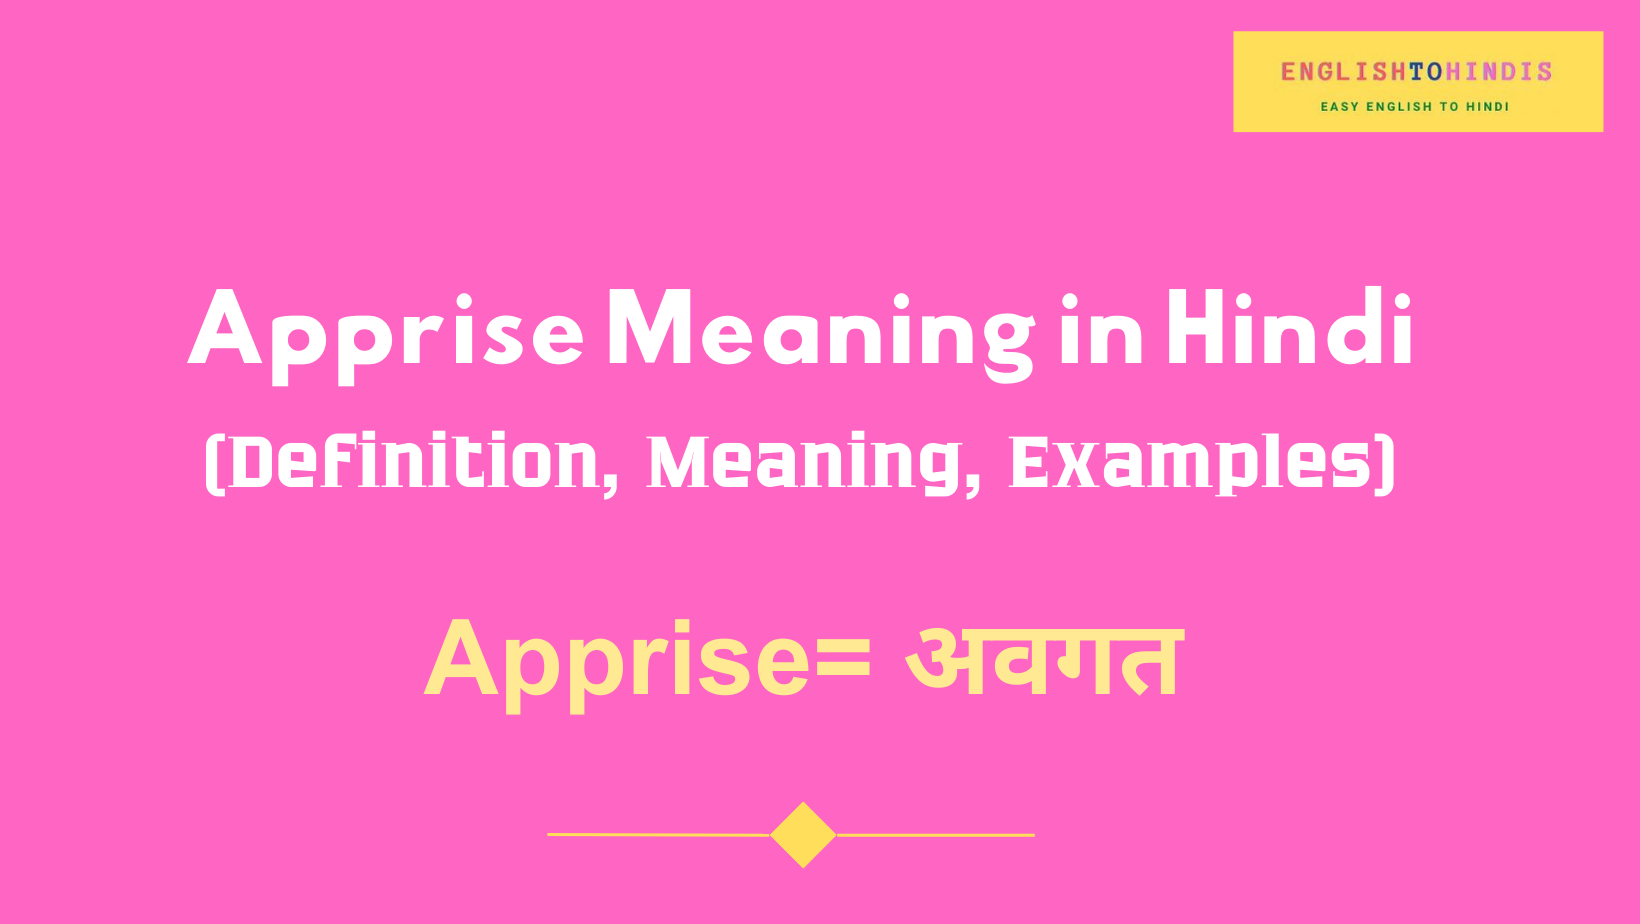 Apprise Meaning in Hindi